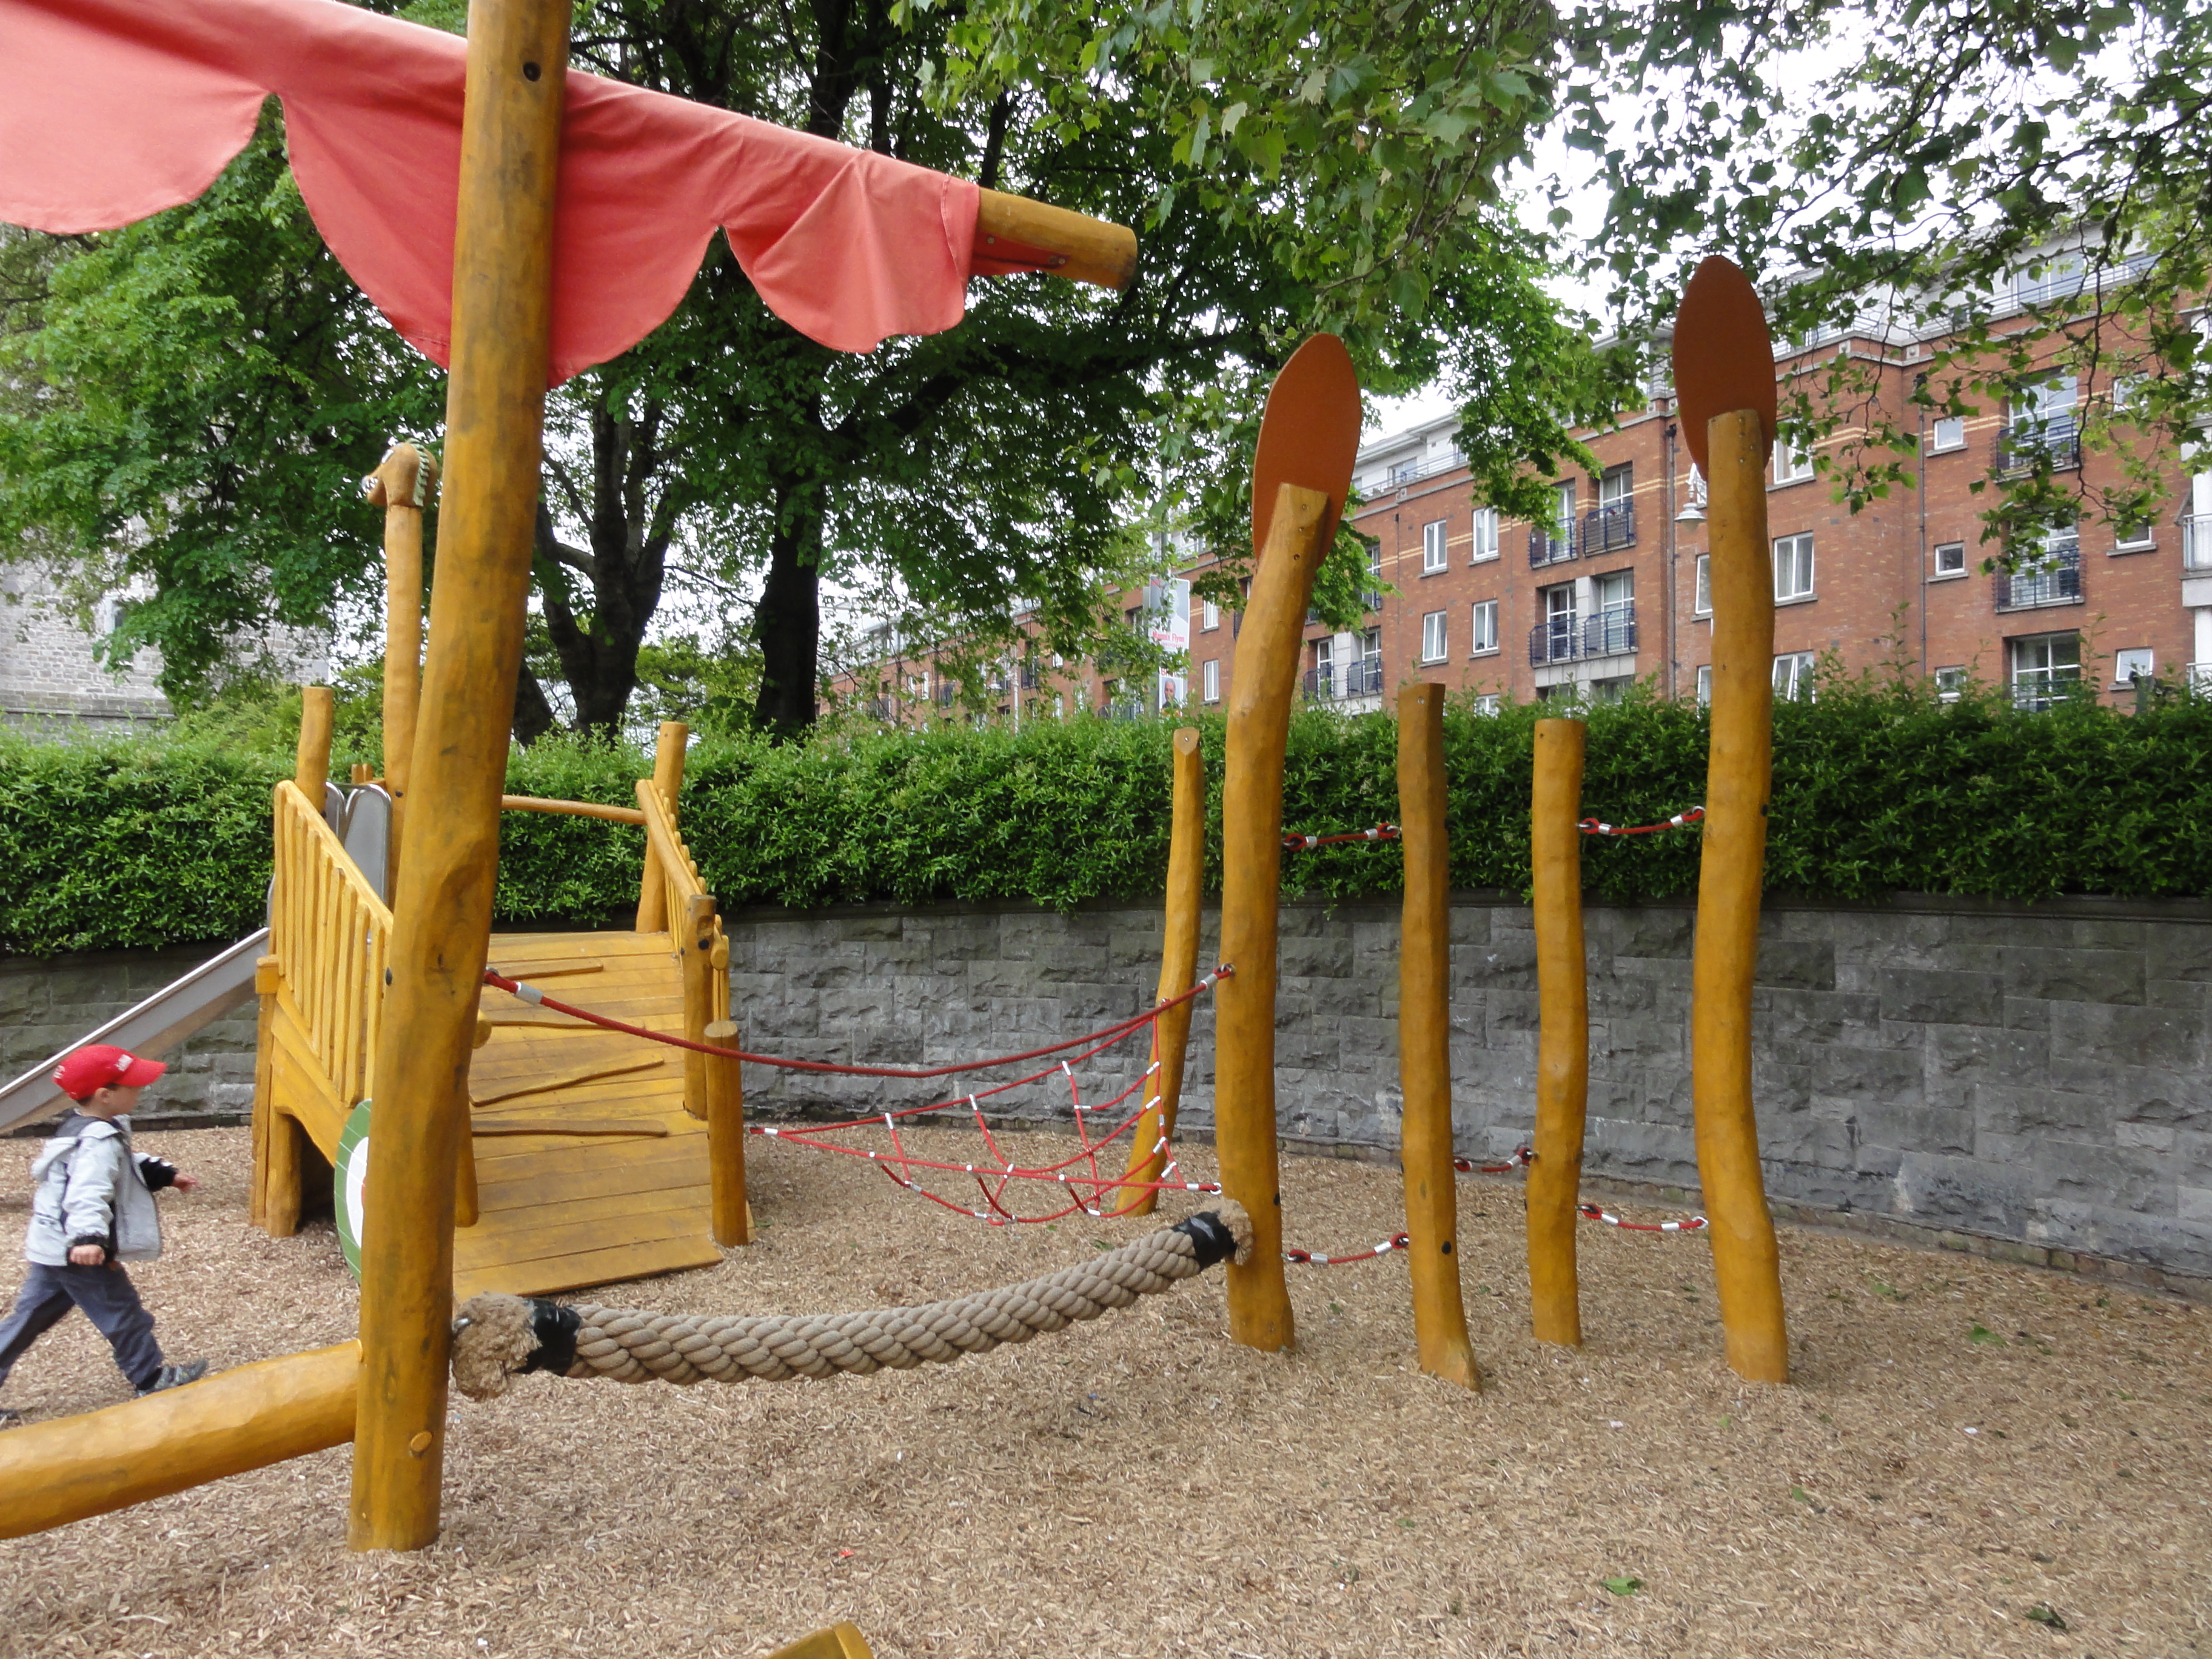 Playground for St. Patrick's Park in Dublin, located within the garden next to the cathedral